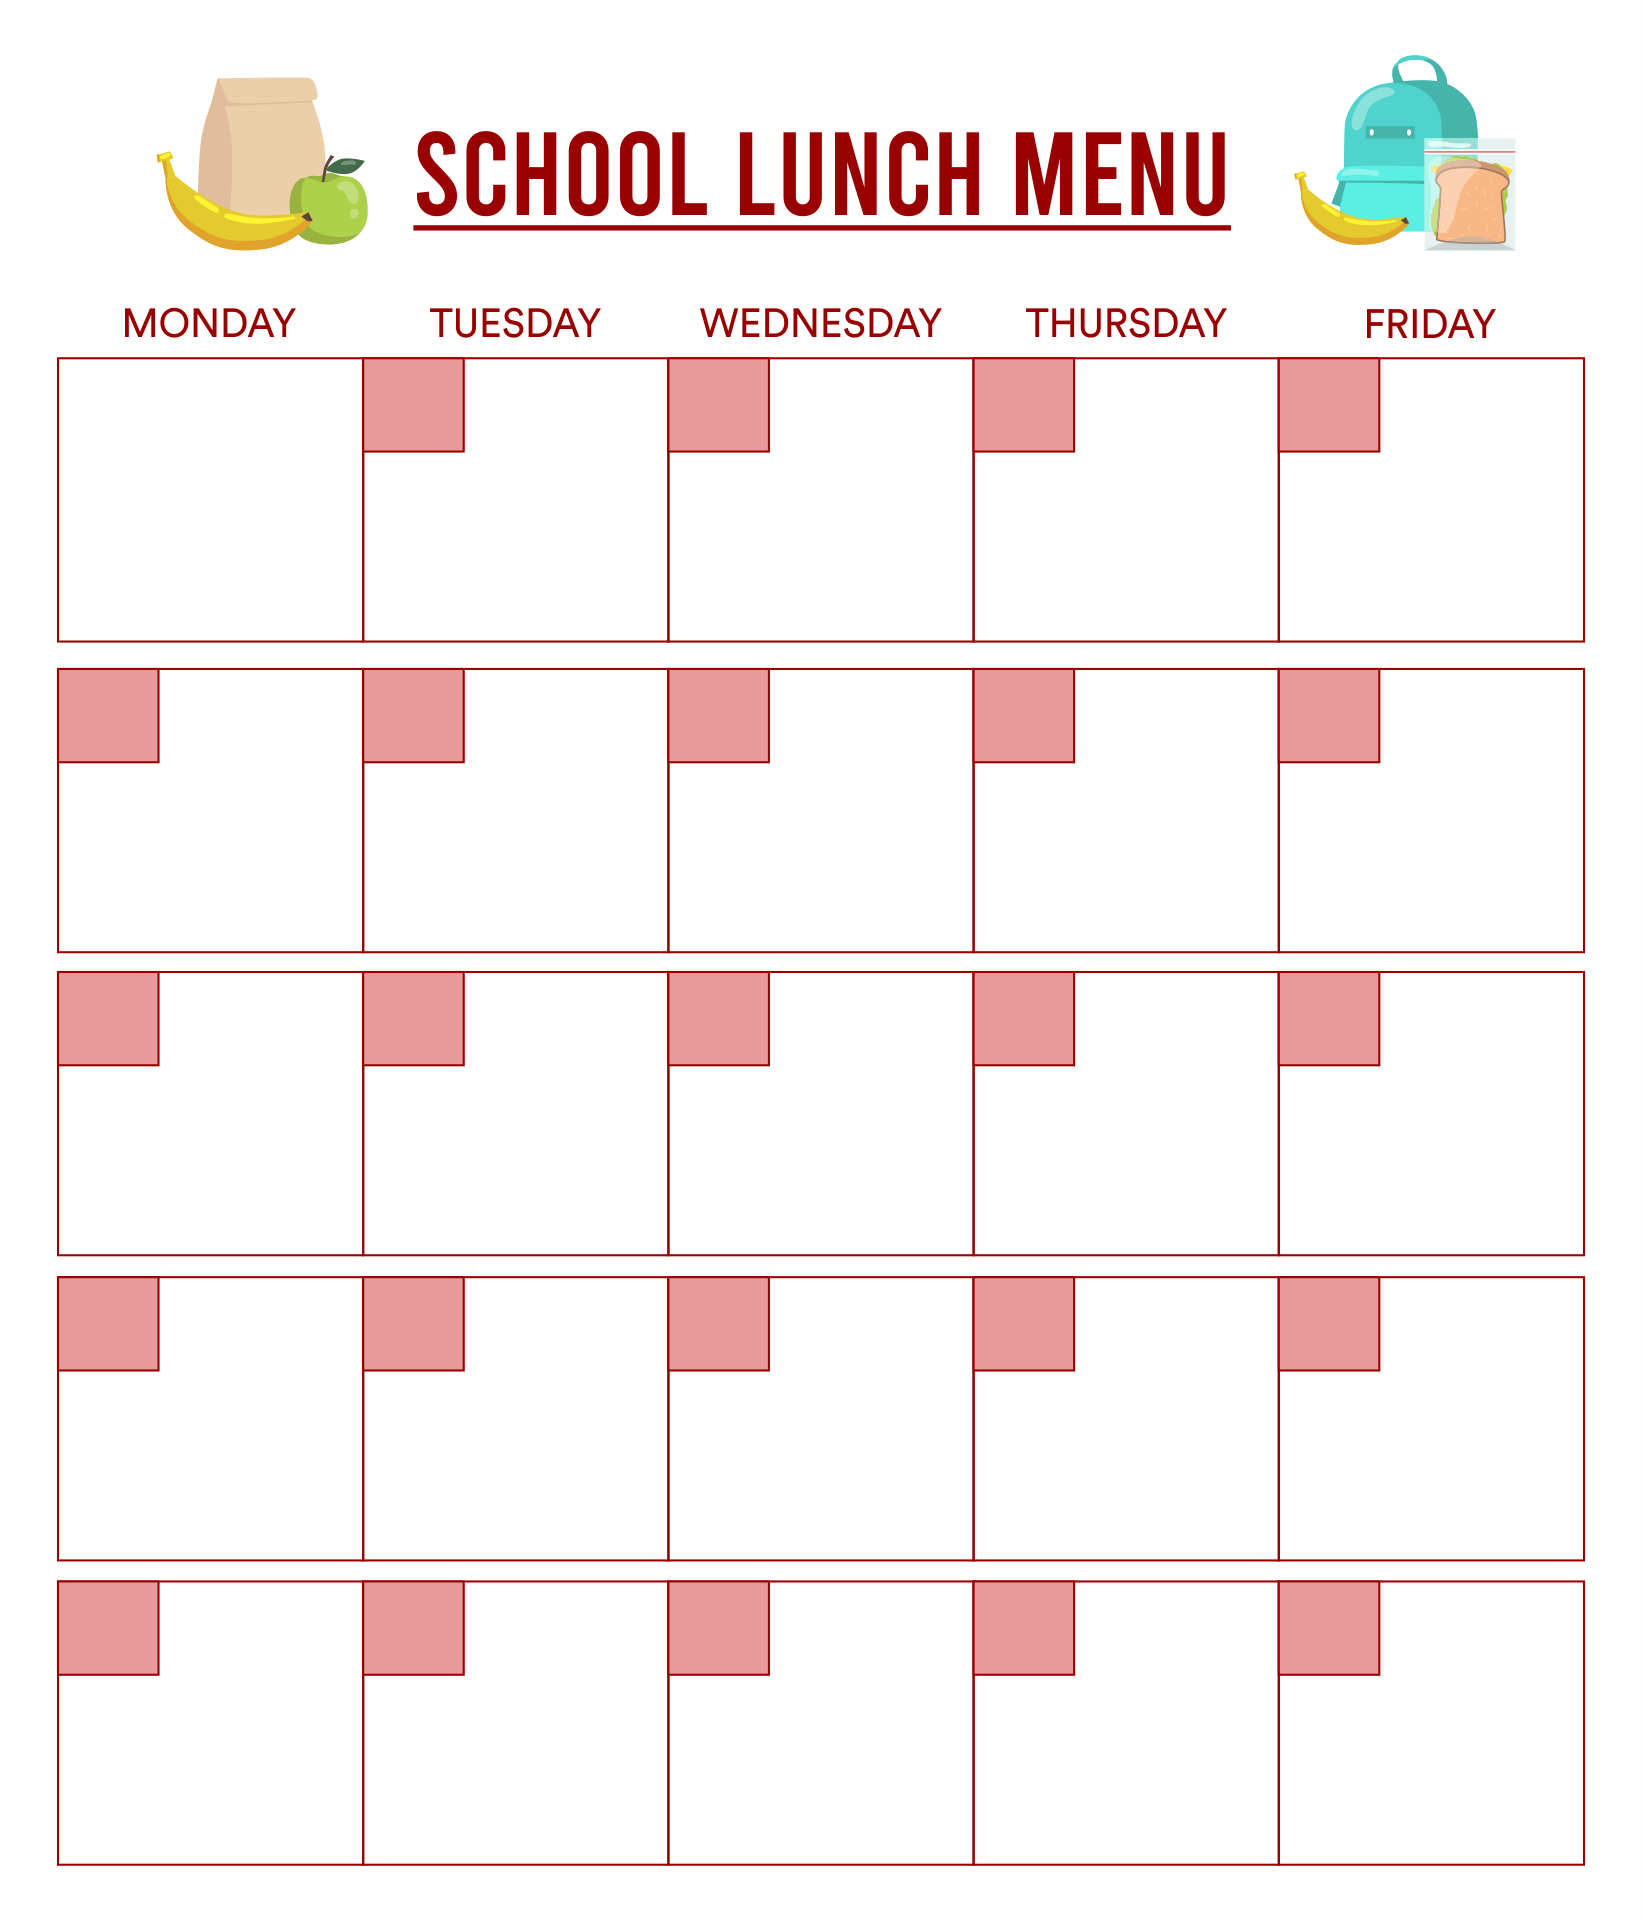 21 Best Free Printable Blank Menu For Day Care - printablee.com Pertaining To Free School Lunch Menu Templates